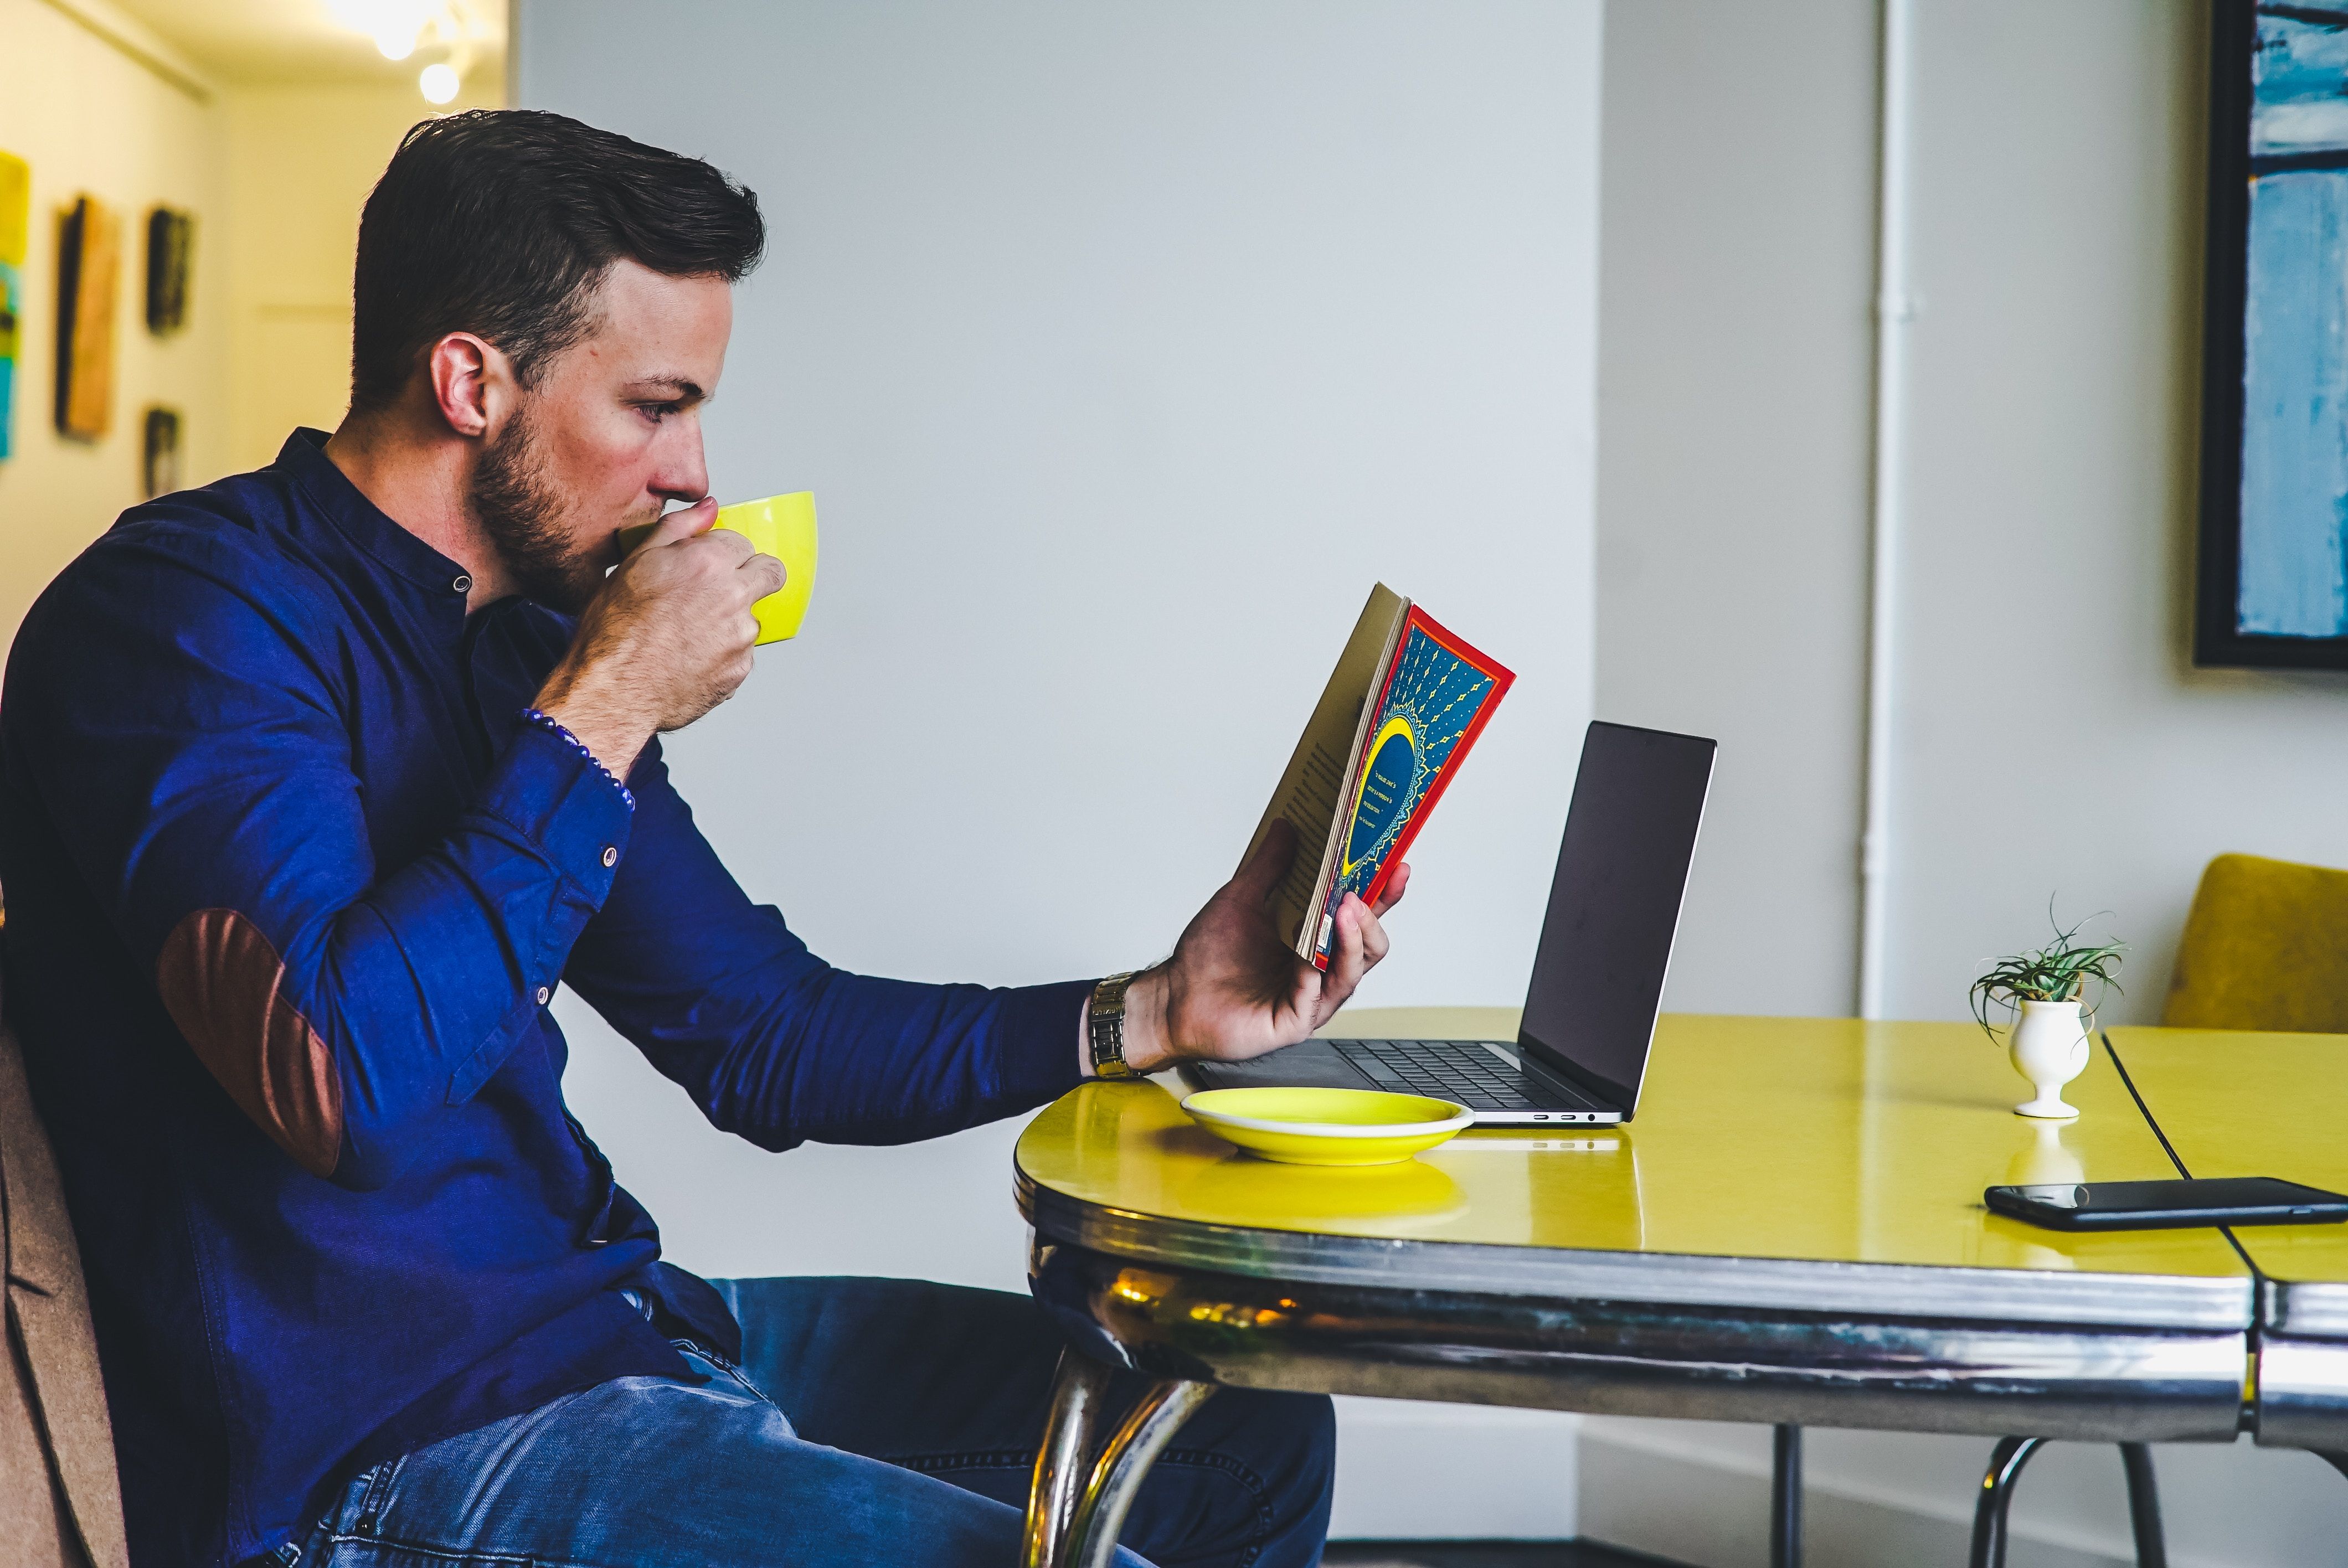 man reading a book at a yellow table with a yellow cup in his hand and a laptop open in front of him.